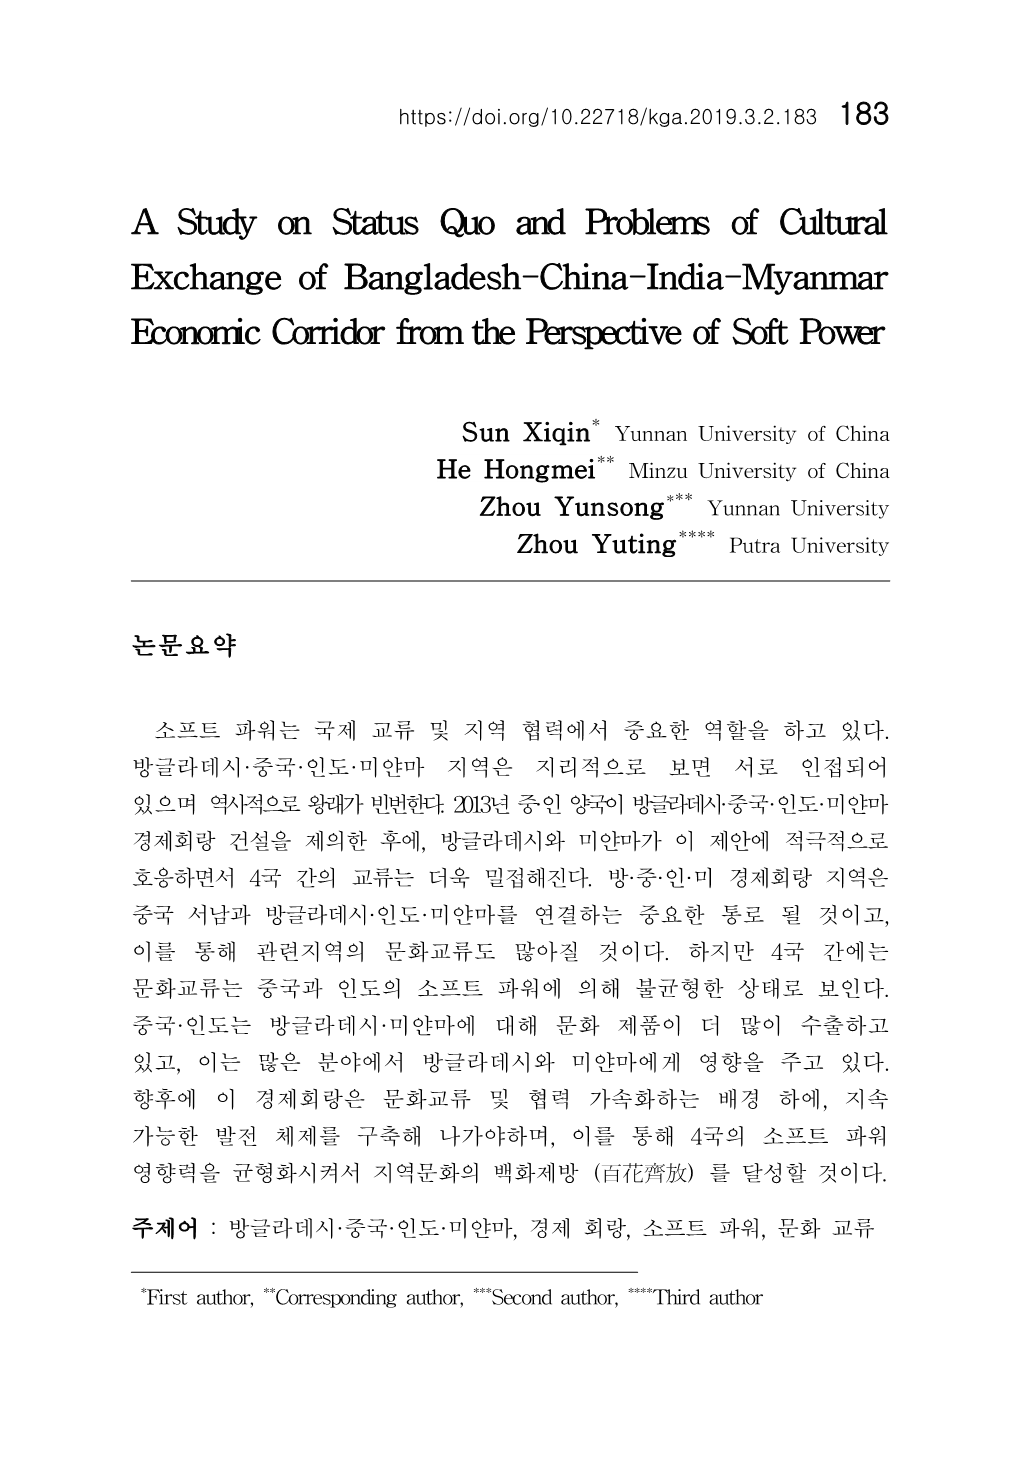 A Study on Status Quo and Problems of Cultural Exchange of Bangladesh-China-India-Myanmar Economic Corridor from the Perspective of Soft Power